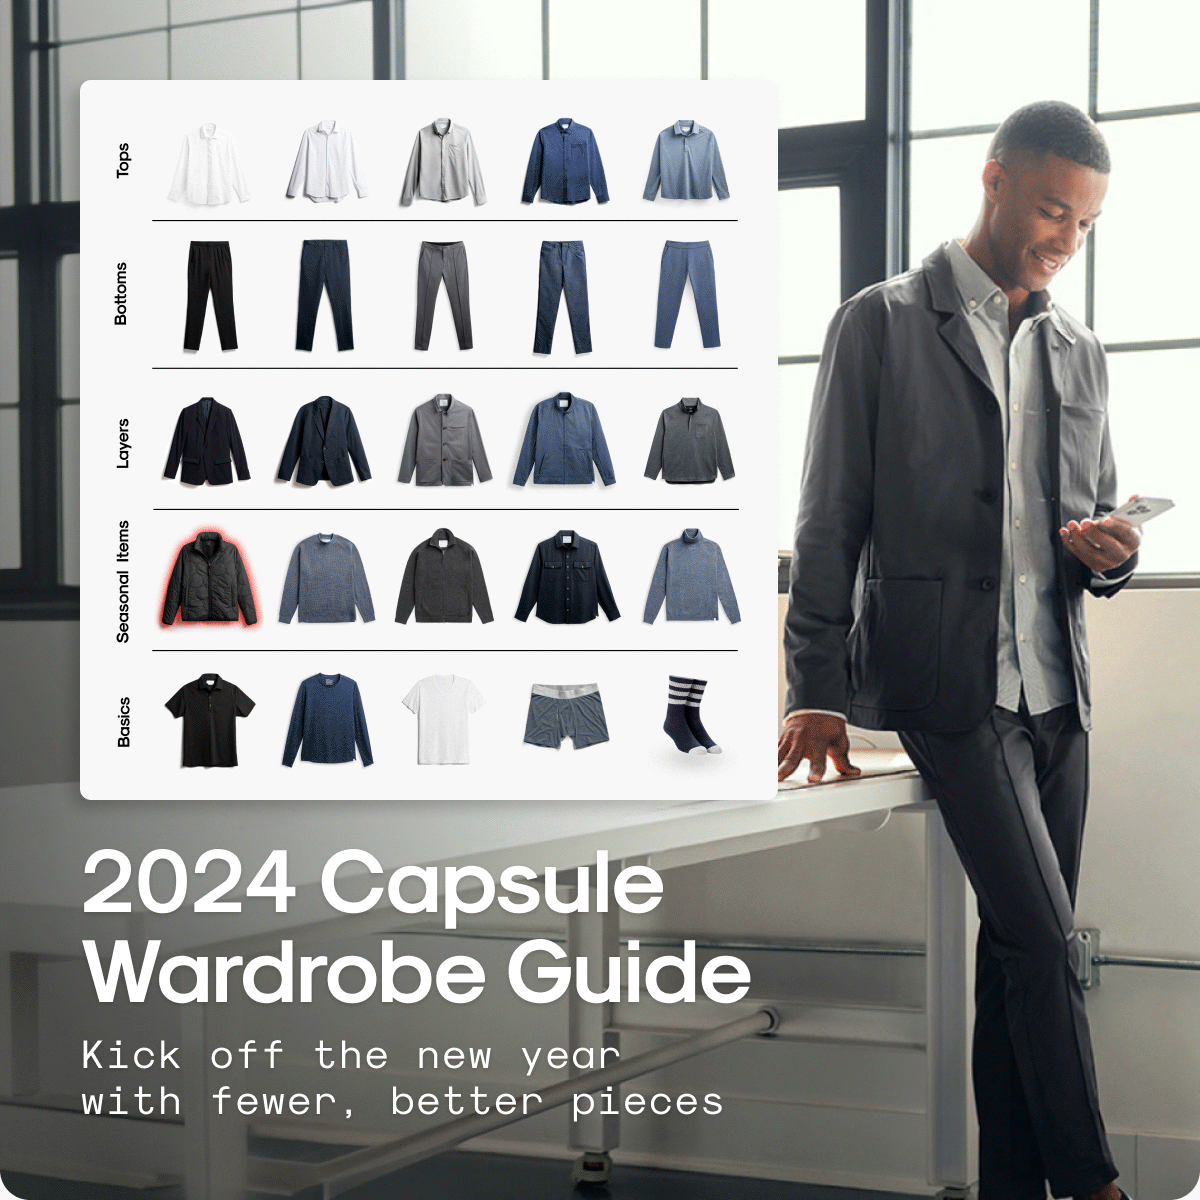 Capsule Wardrobe Guide: Kick off the new year with fewer, better pieces